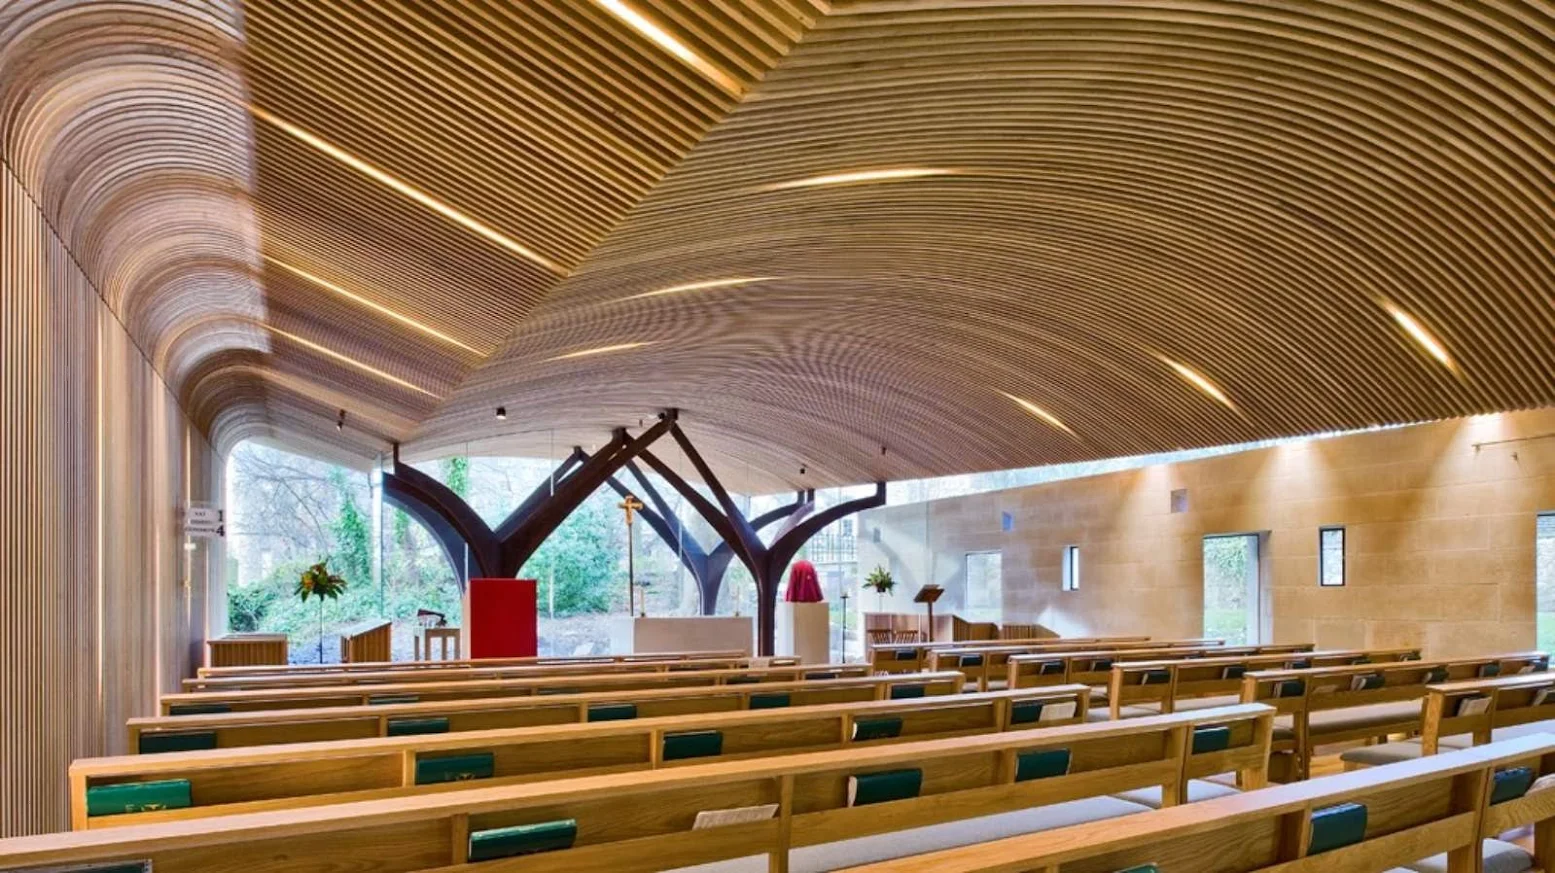 07-Chapel-of-Saint-Albert-the-Great-by-Simpson-&-Brown-Architects